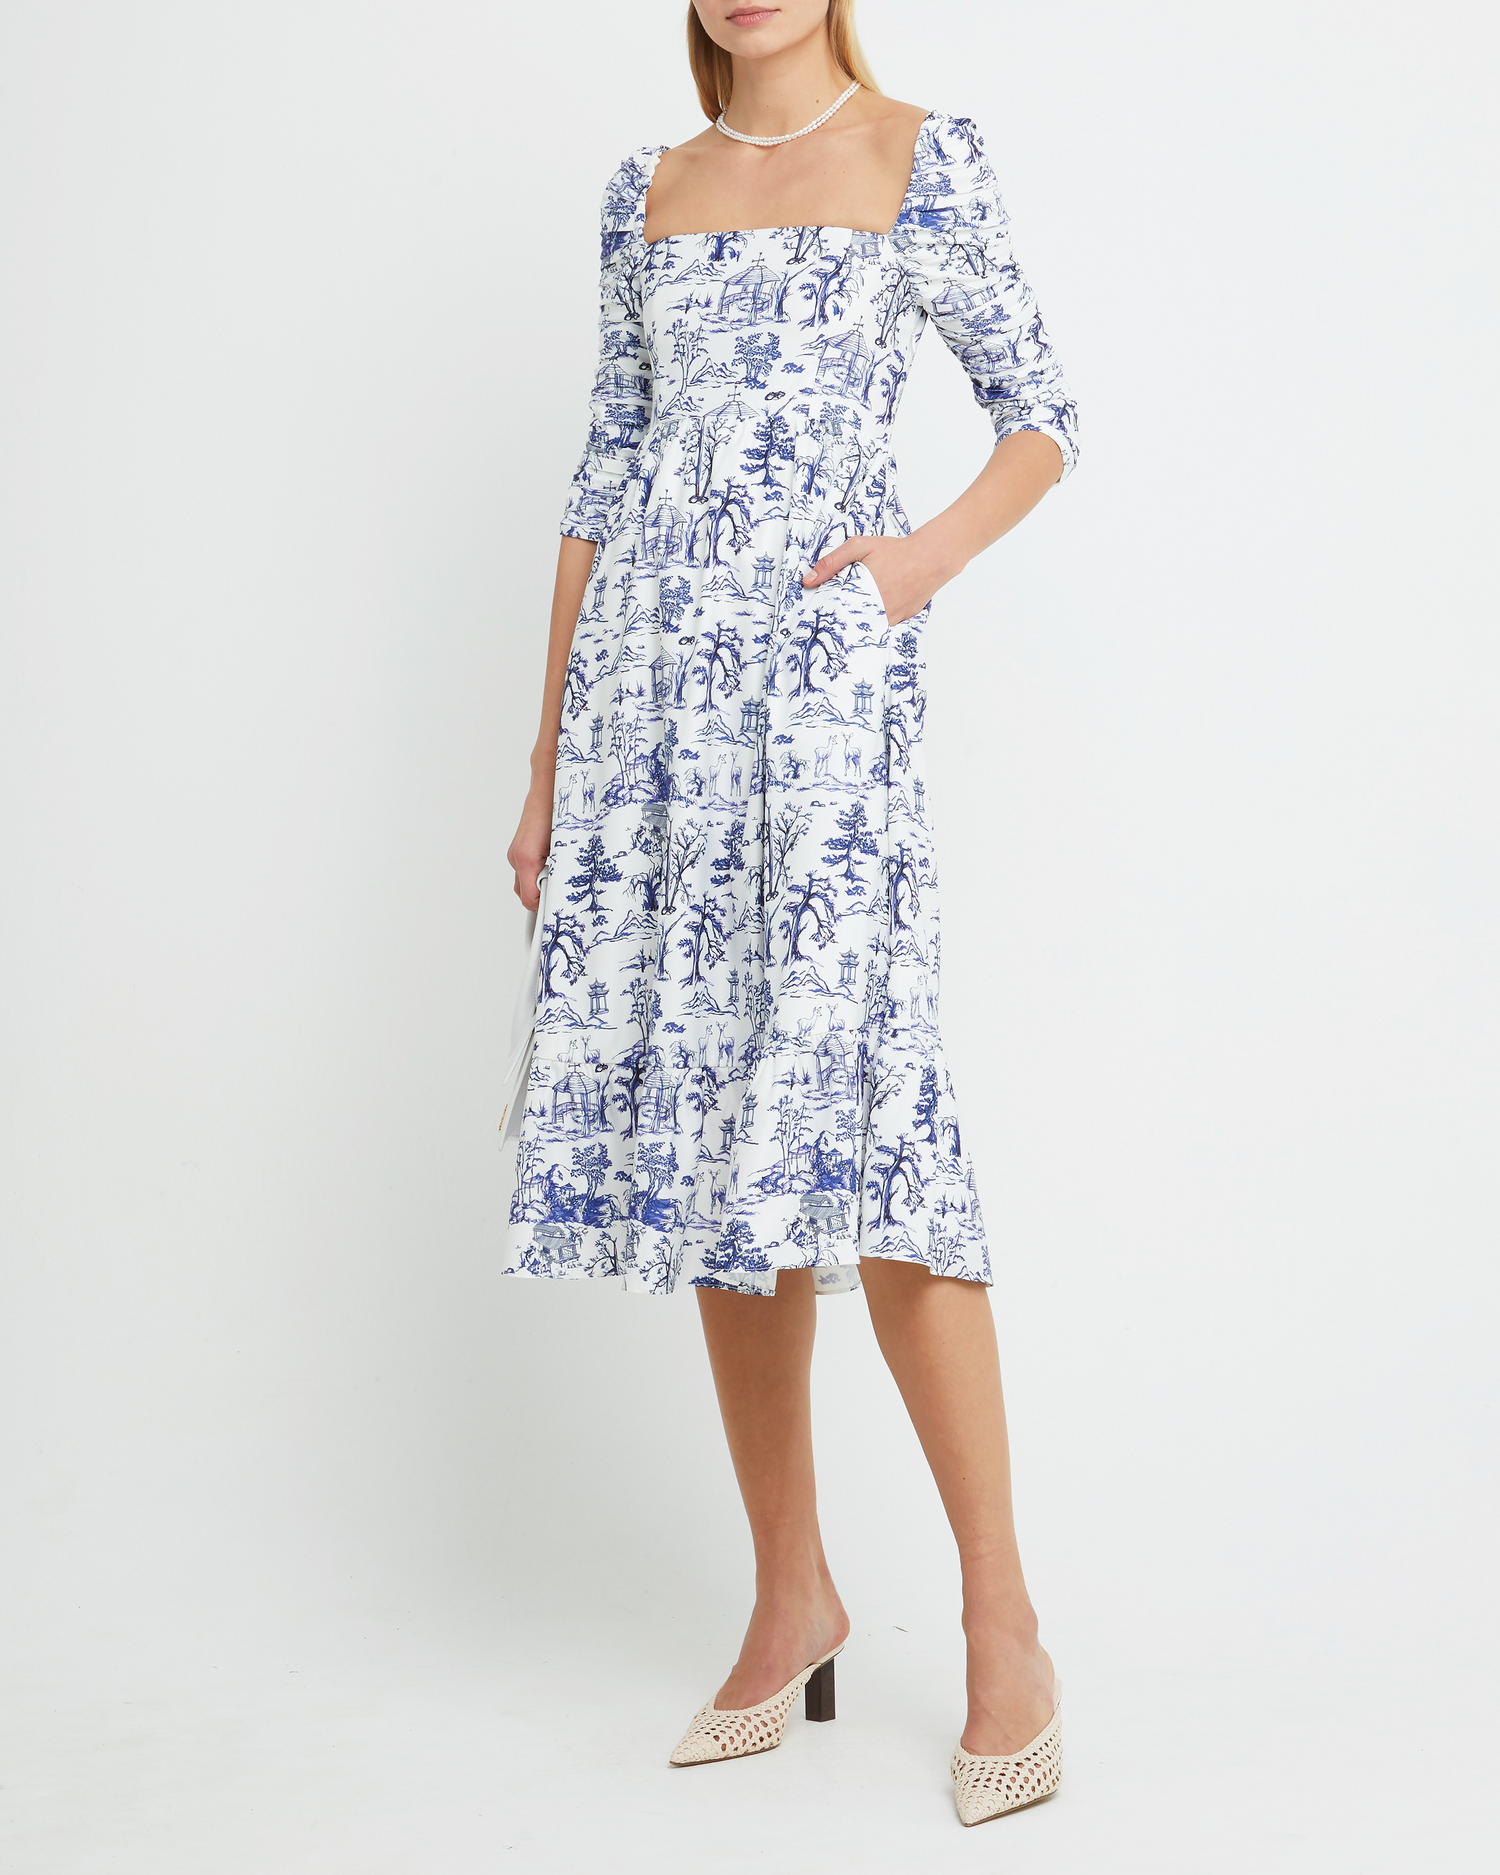 First image of Bonnie Dress, a blue midi dress, toile, pockets, ruched sleeves, square neckline, long sleeves, 3/4 sleeves